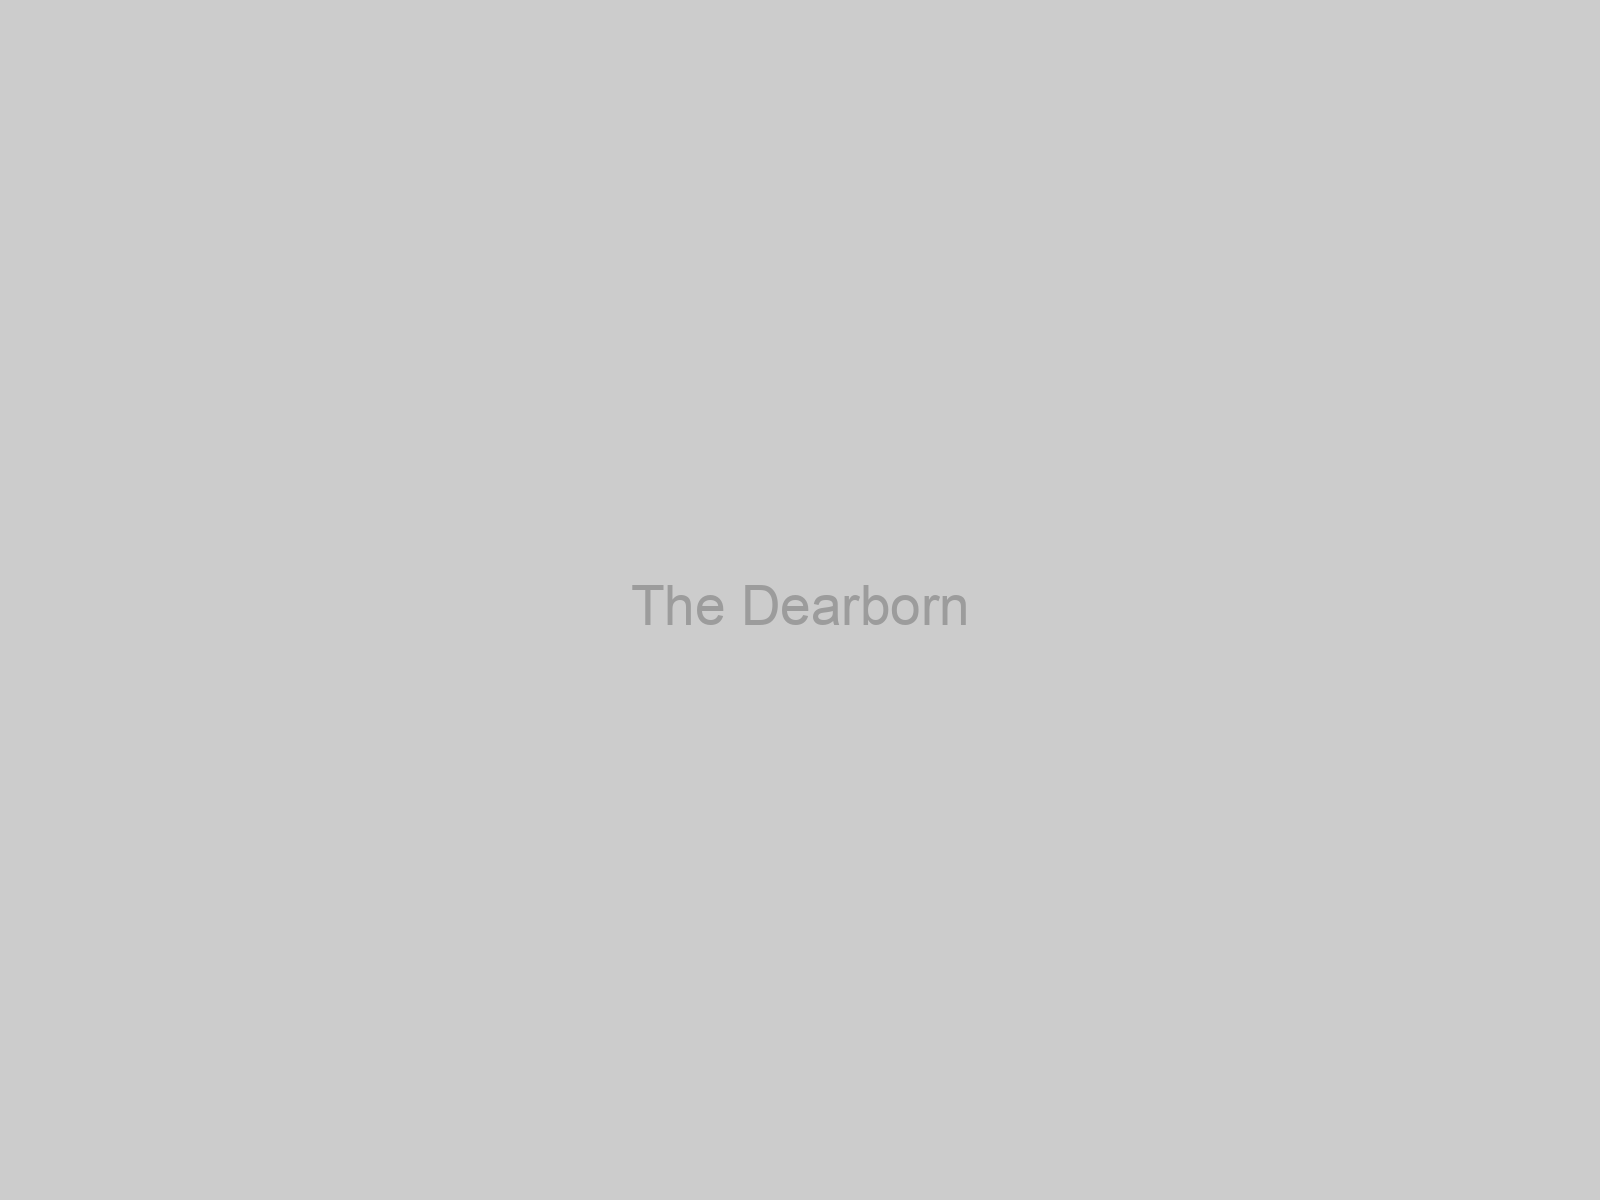 The Dearborn